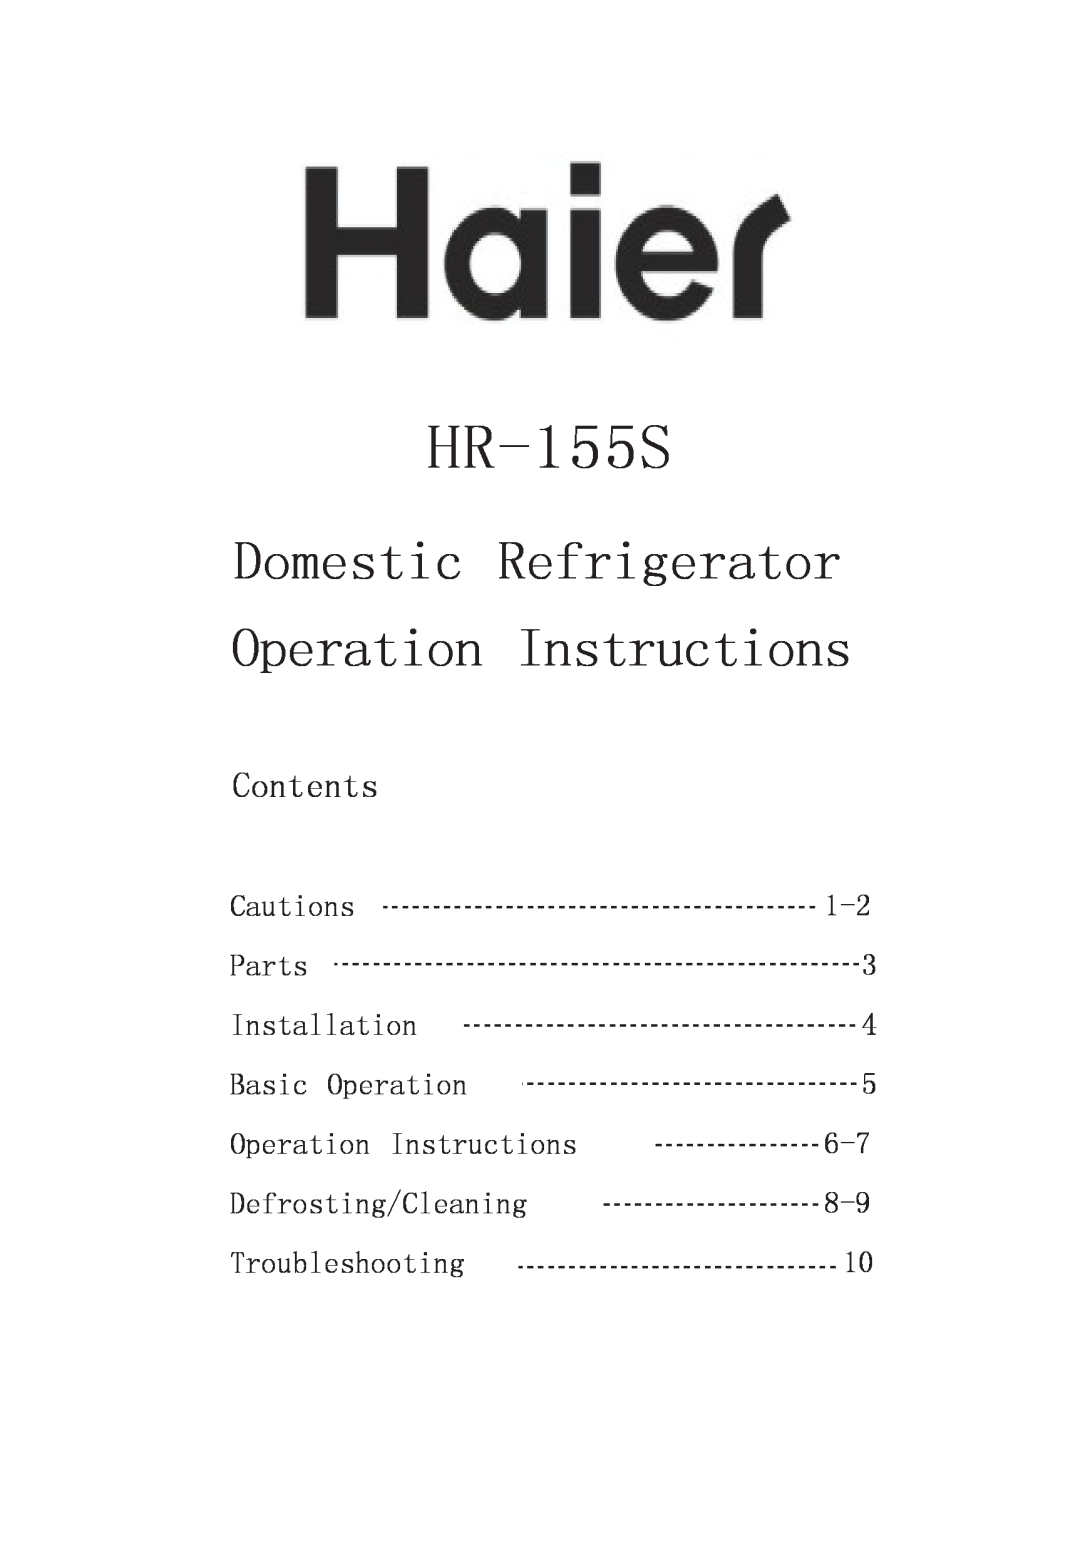 Haier HR-155S manual Domestic Refrigerator Operation Instructions, Contents 